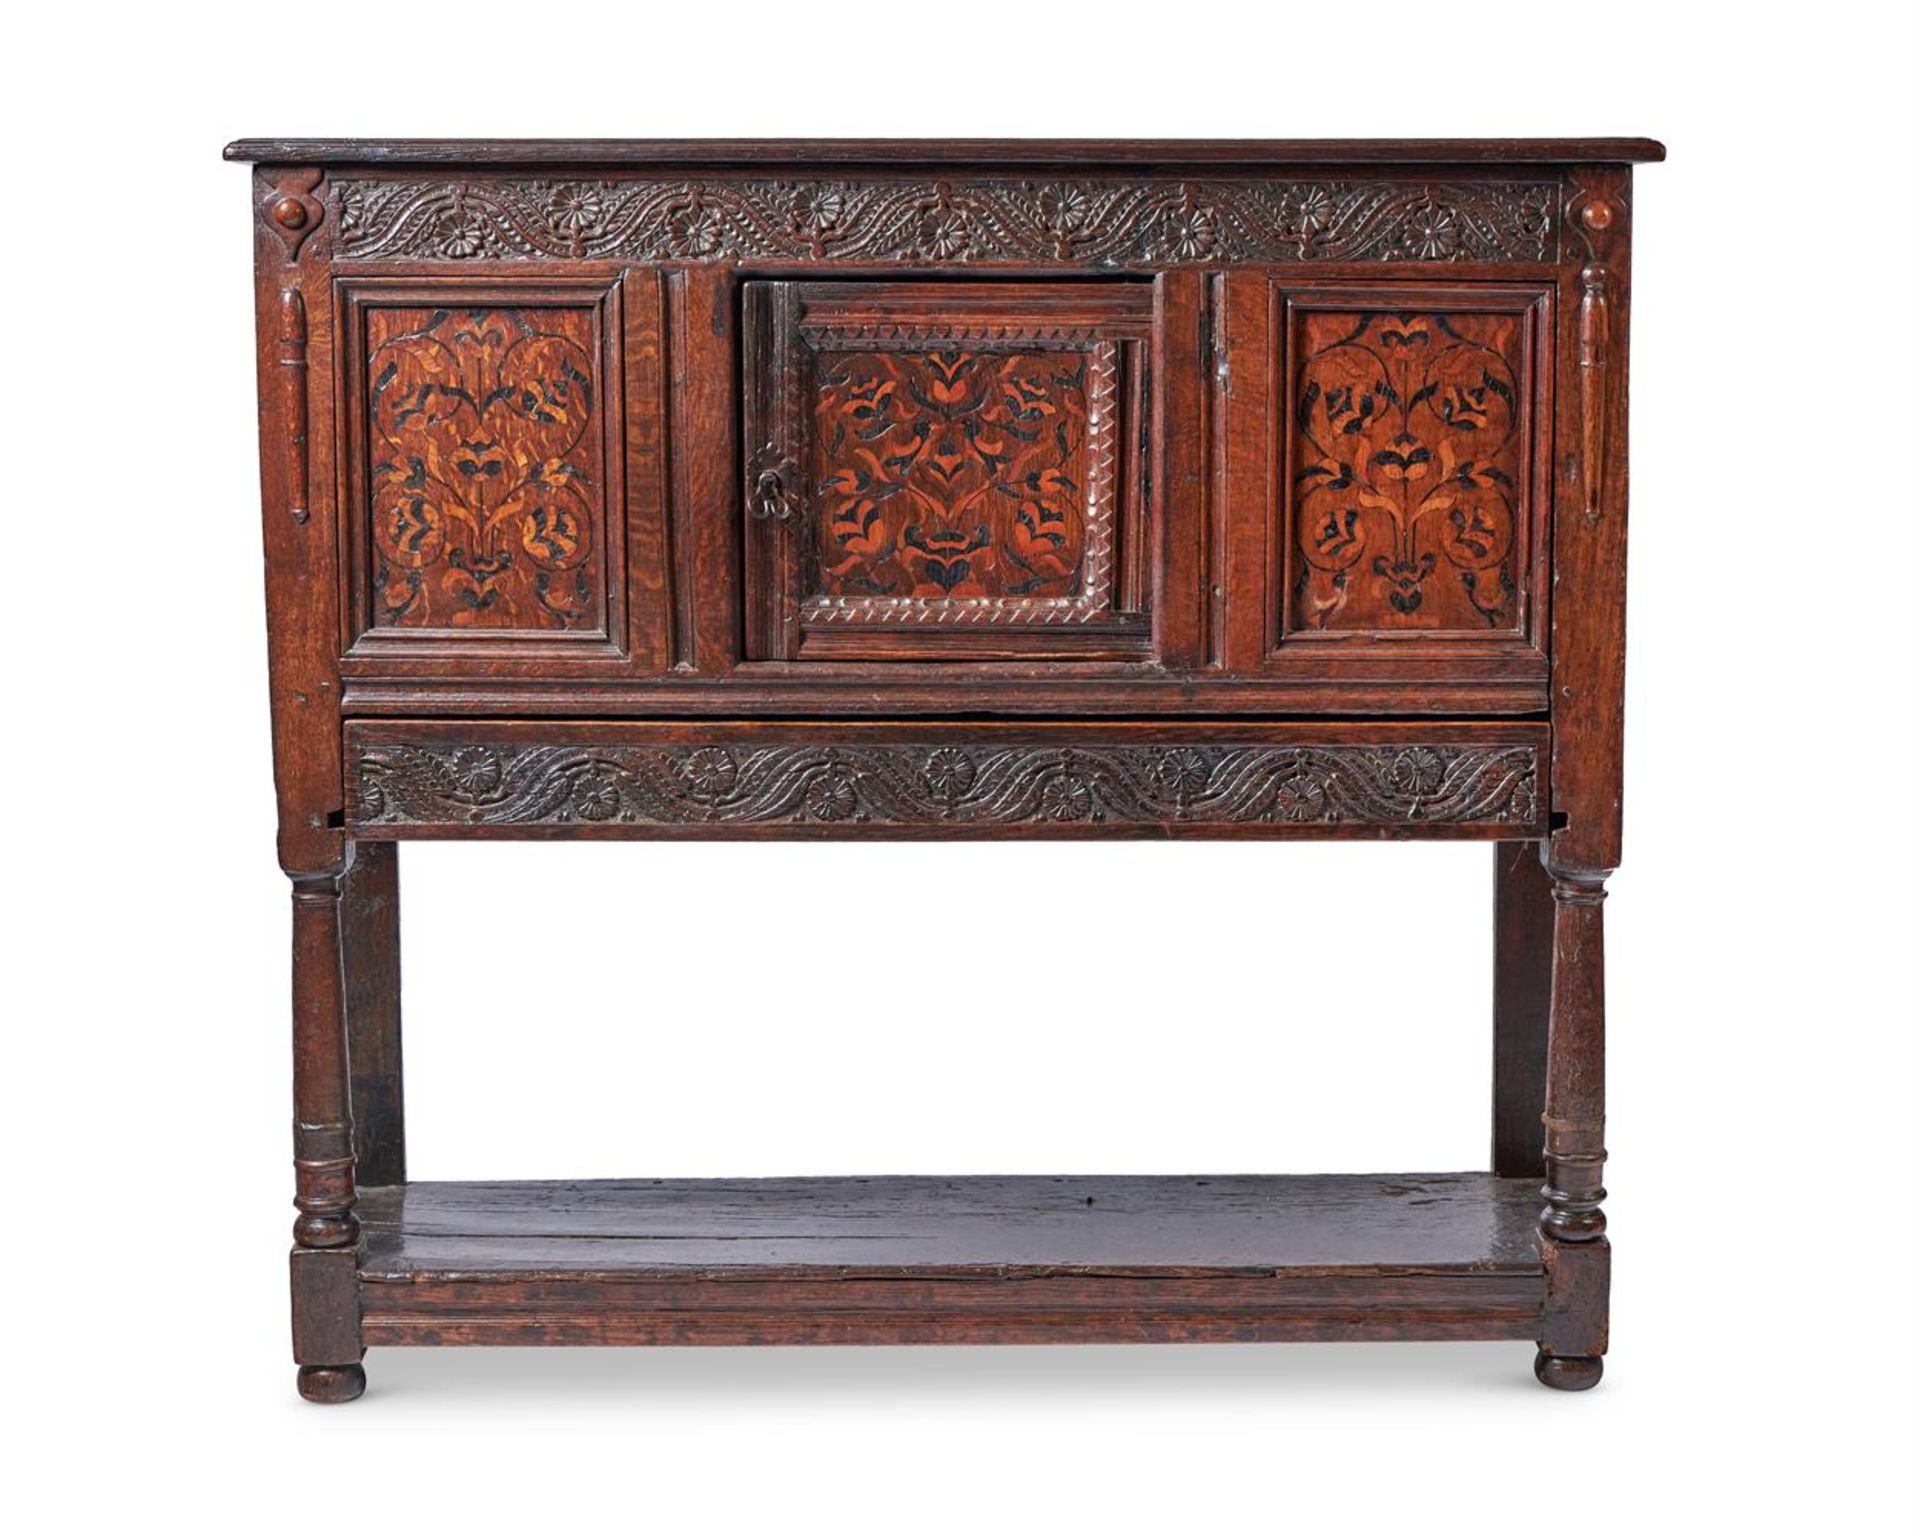 A CHARLES II OAK CUPBOARD OF YORKSHIRE TYPE, 17TH CENTURY